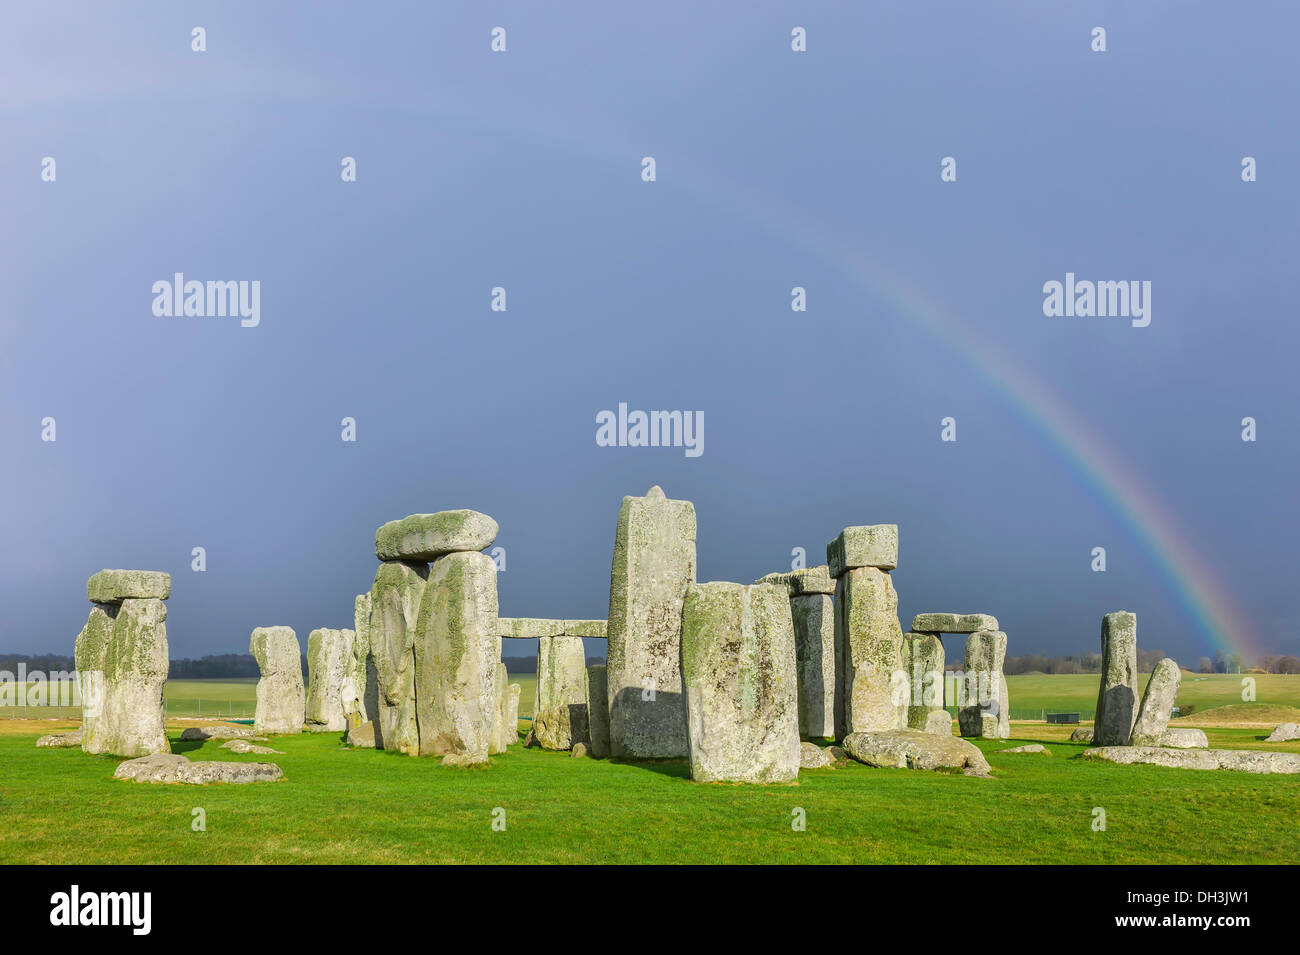 Stonehenge, prehistoric monument, on a cold winter's day with blanket cloud cover but with a hopeful rainbow as backdrop. Stock Photo